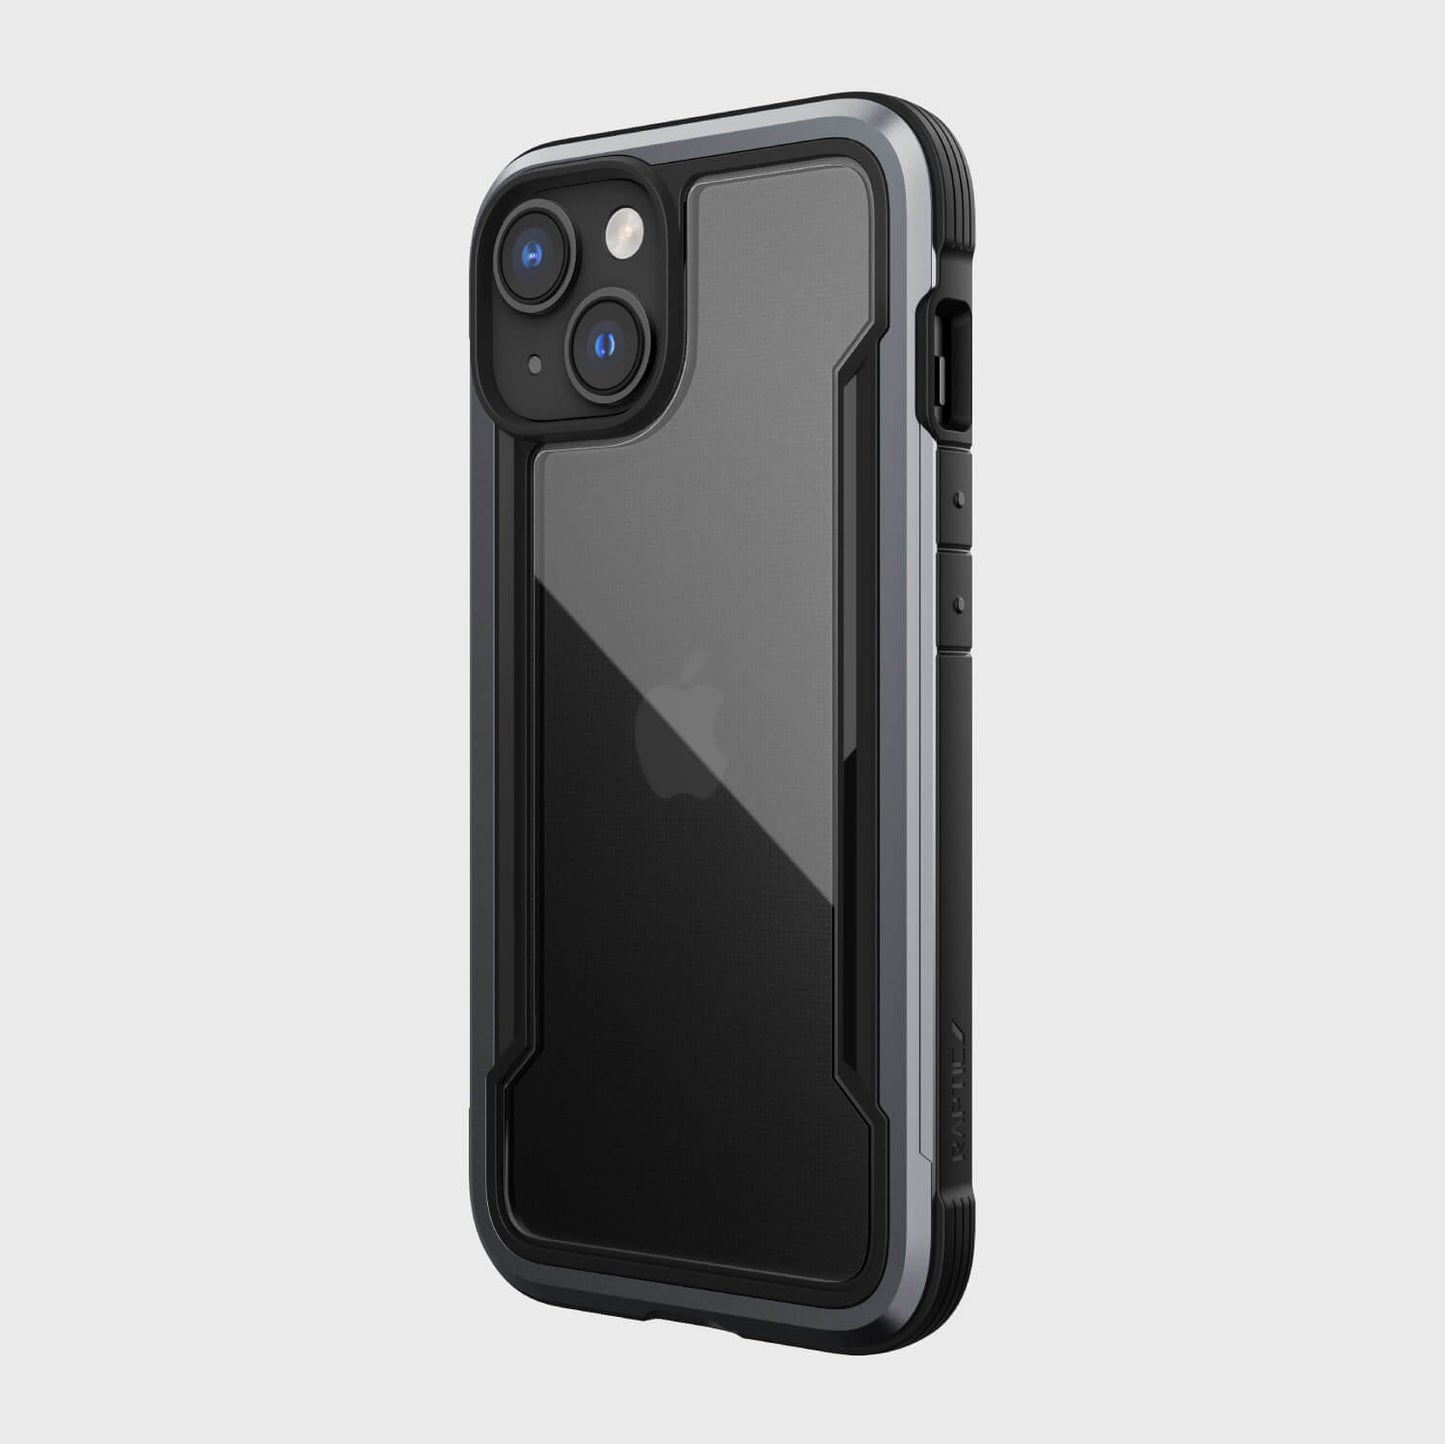 The back of the iPhone 14 Case - Shield by Raptic is shown, providing military-grade drop test protection.